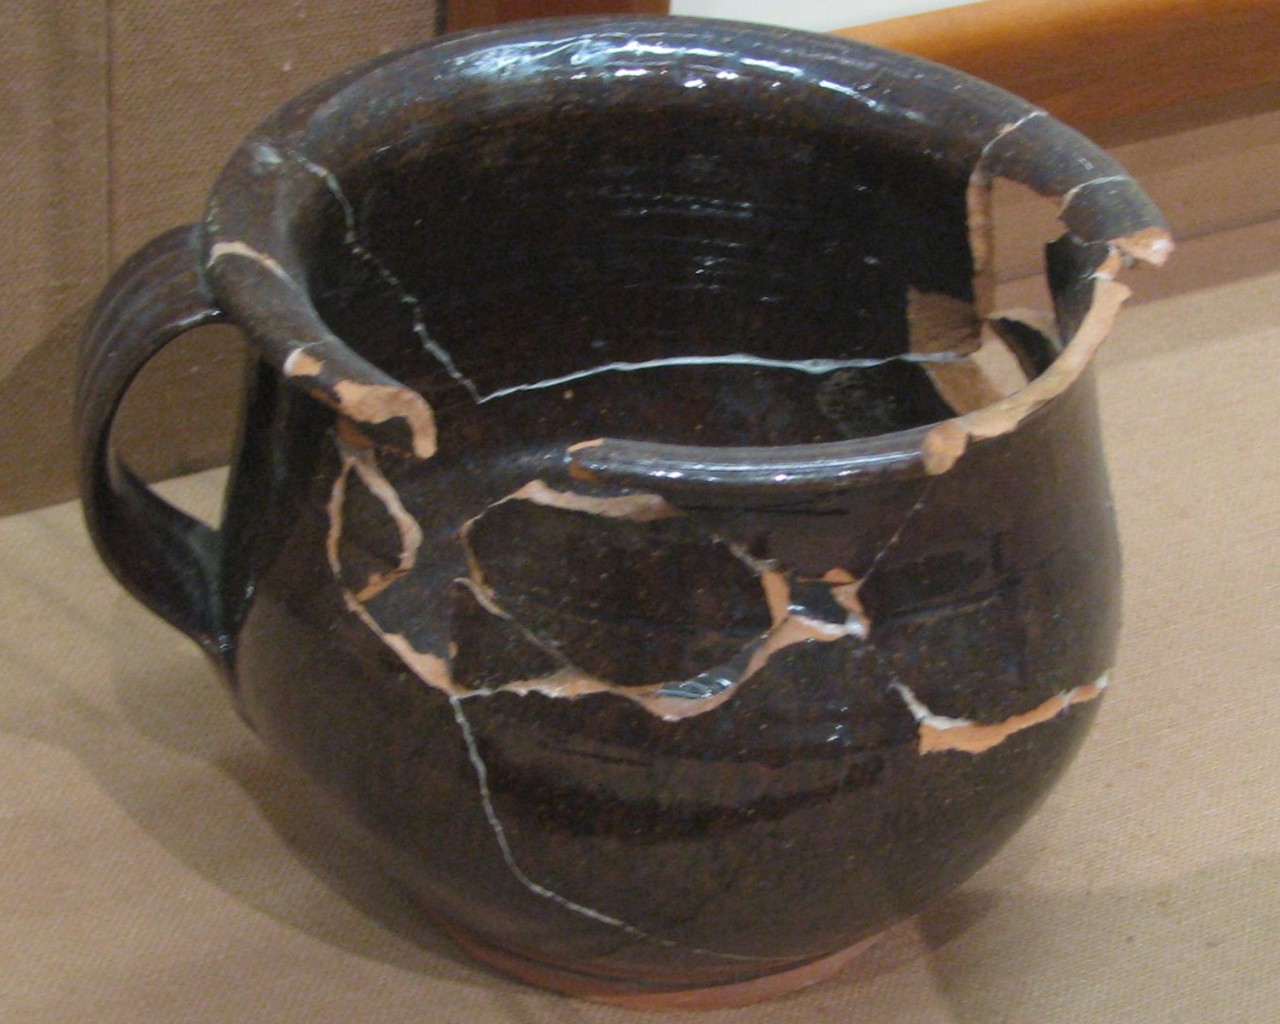 Color photo of a dark brown ceramic pot with a handle and a wide opening. Previously broken, it has been glued back together but several pieces are missing.